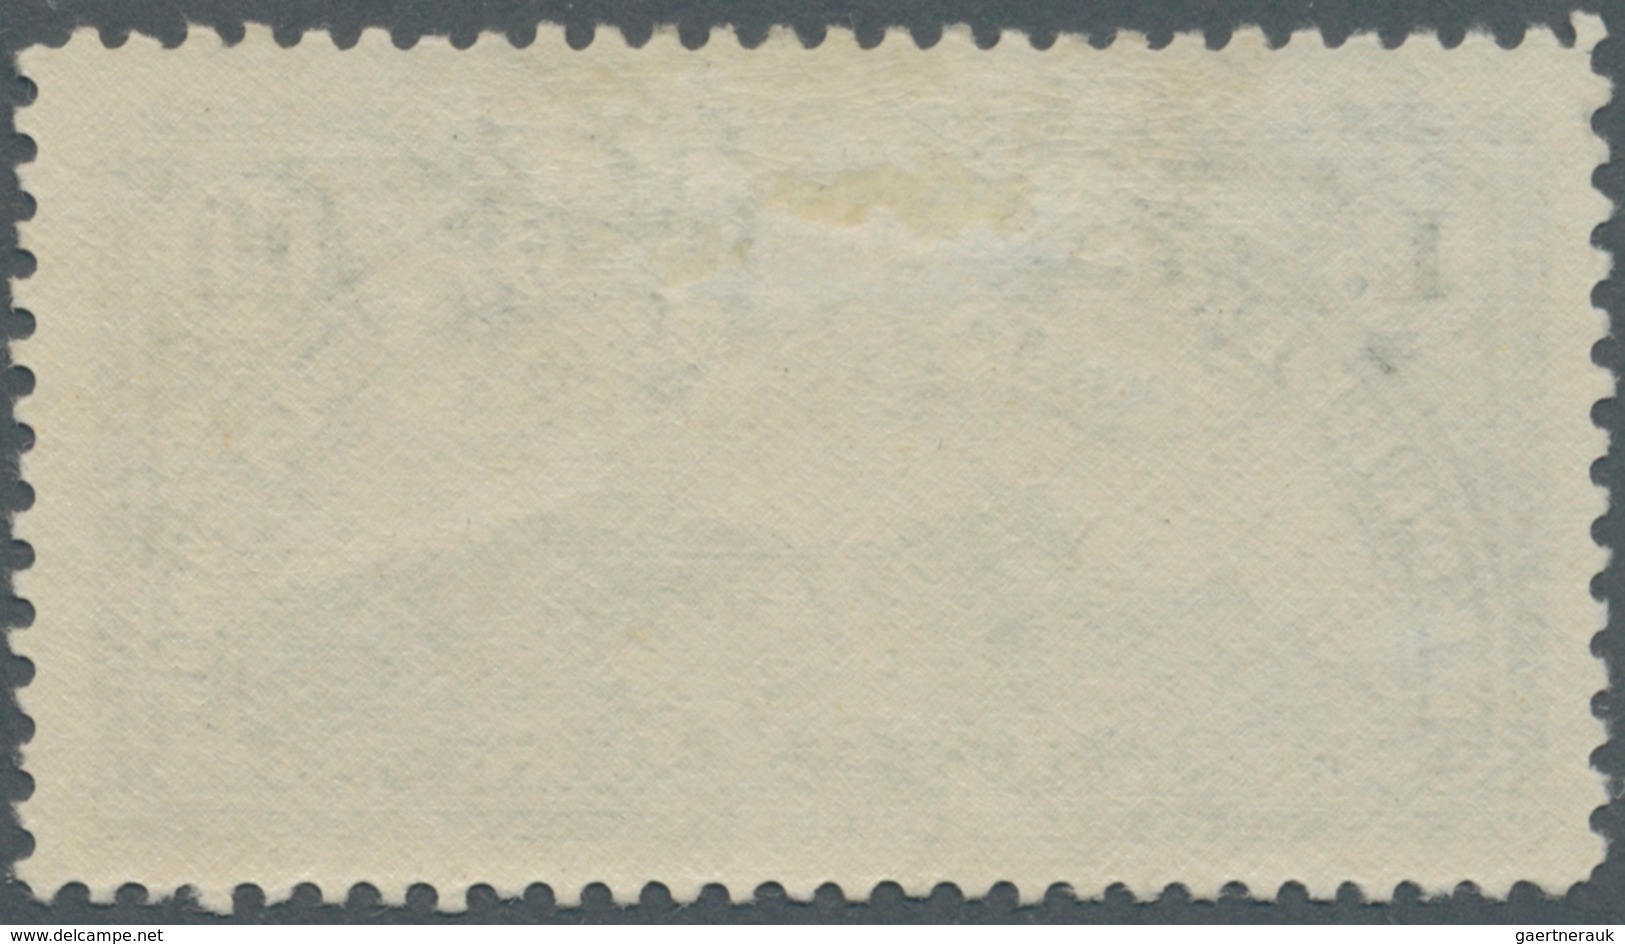 San Marino: 1931, Airmail Stamp ‚Monte Titano‘ 10l. Blue Mint Lightly Hinged, Very Scarce Stamp! Mi. - Unused Stamps